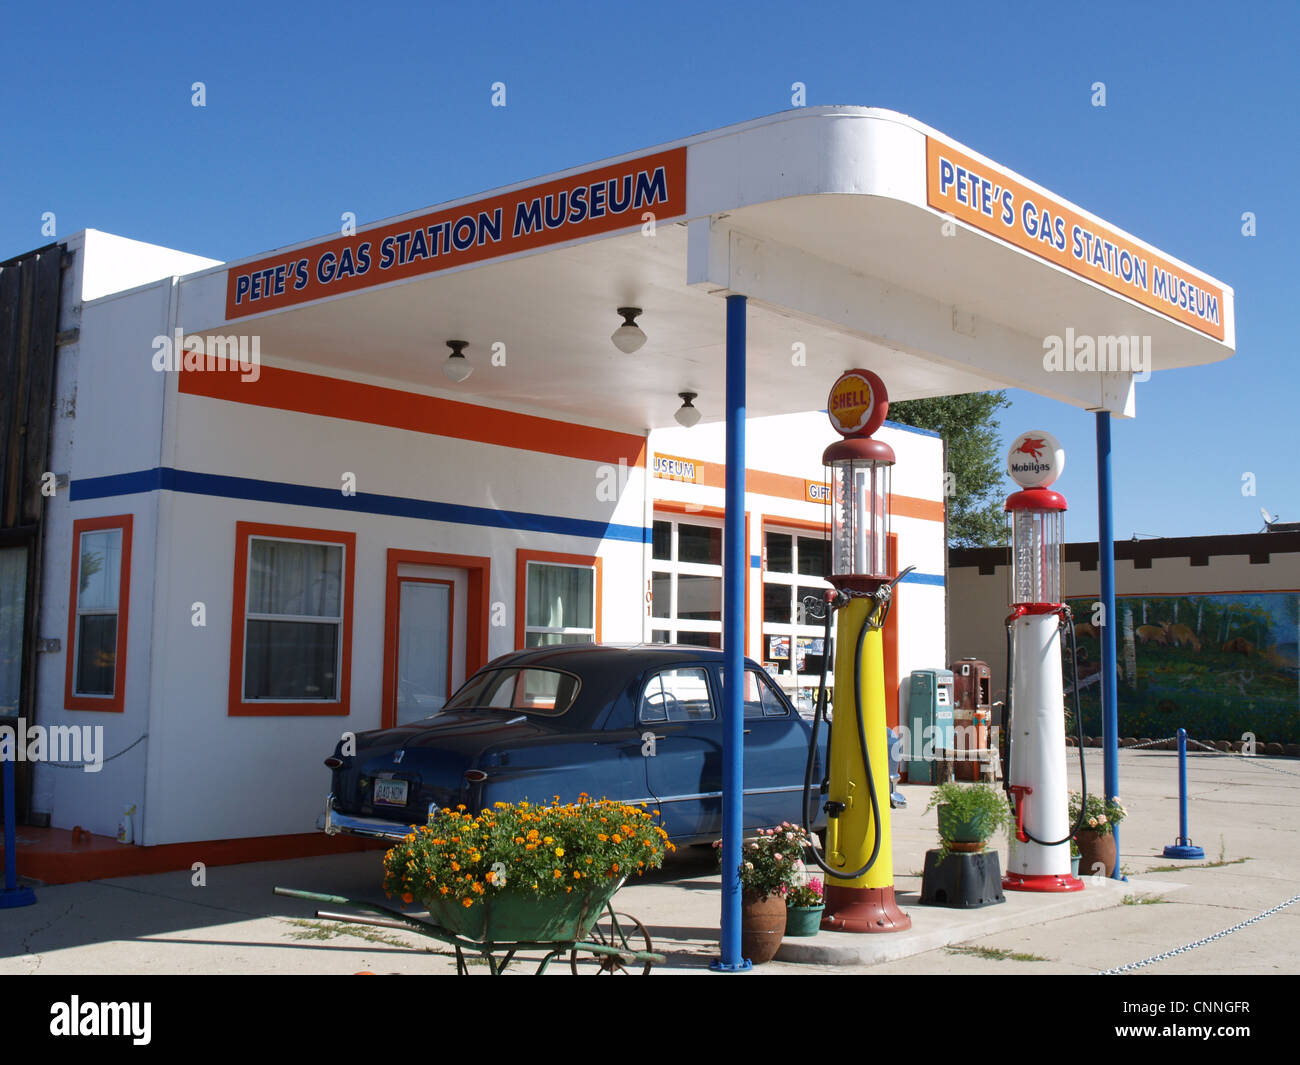 Pete's Gas station museum Stock Photo - Alamy